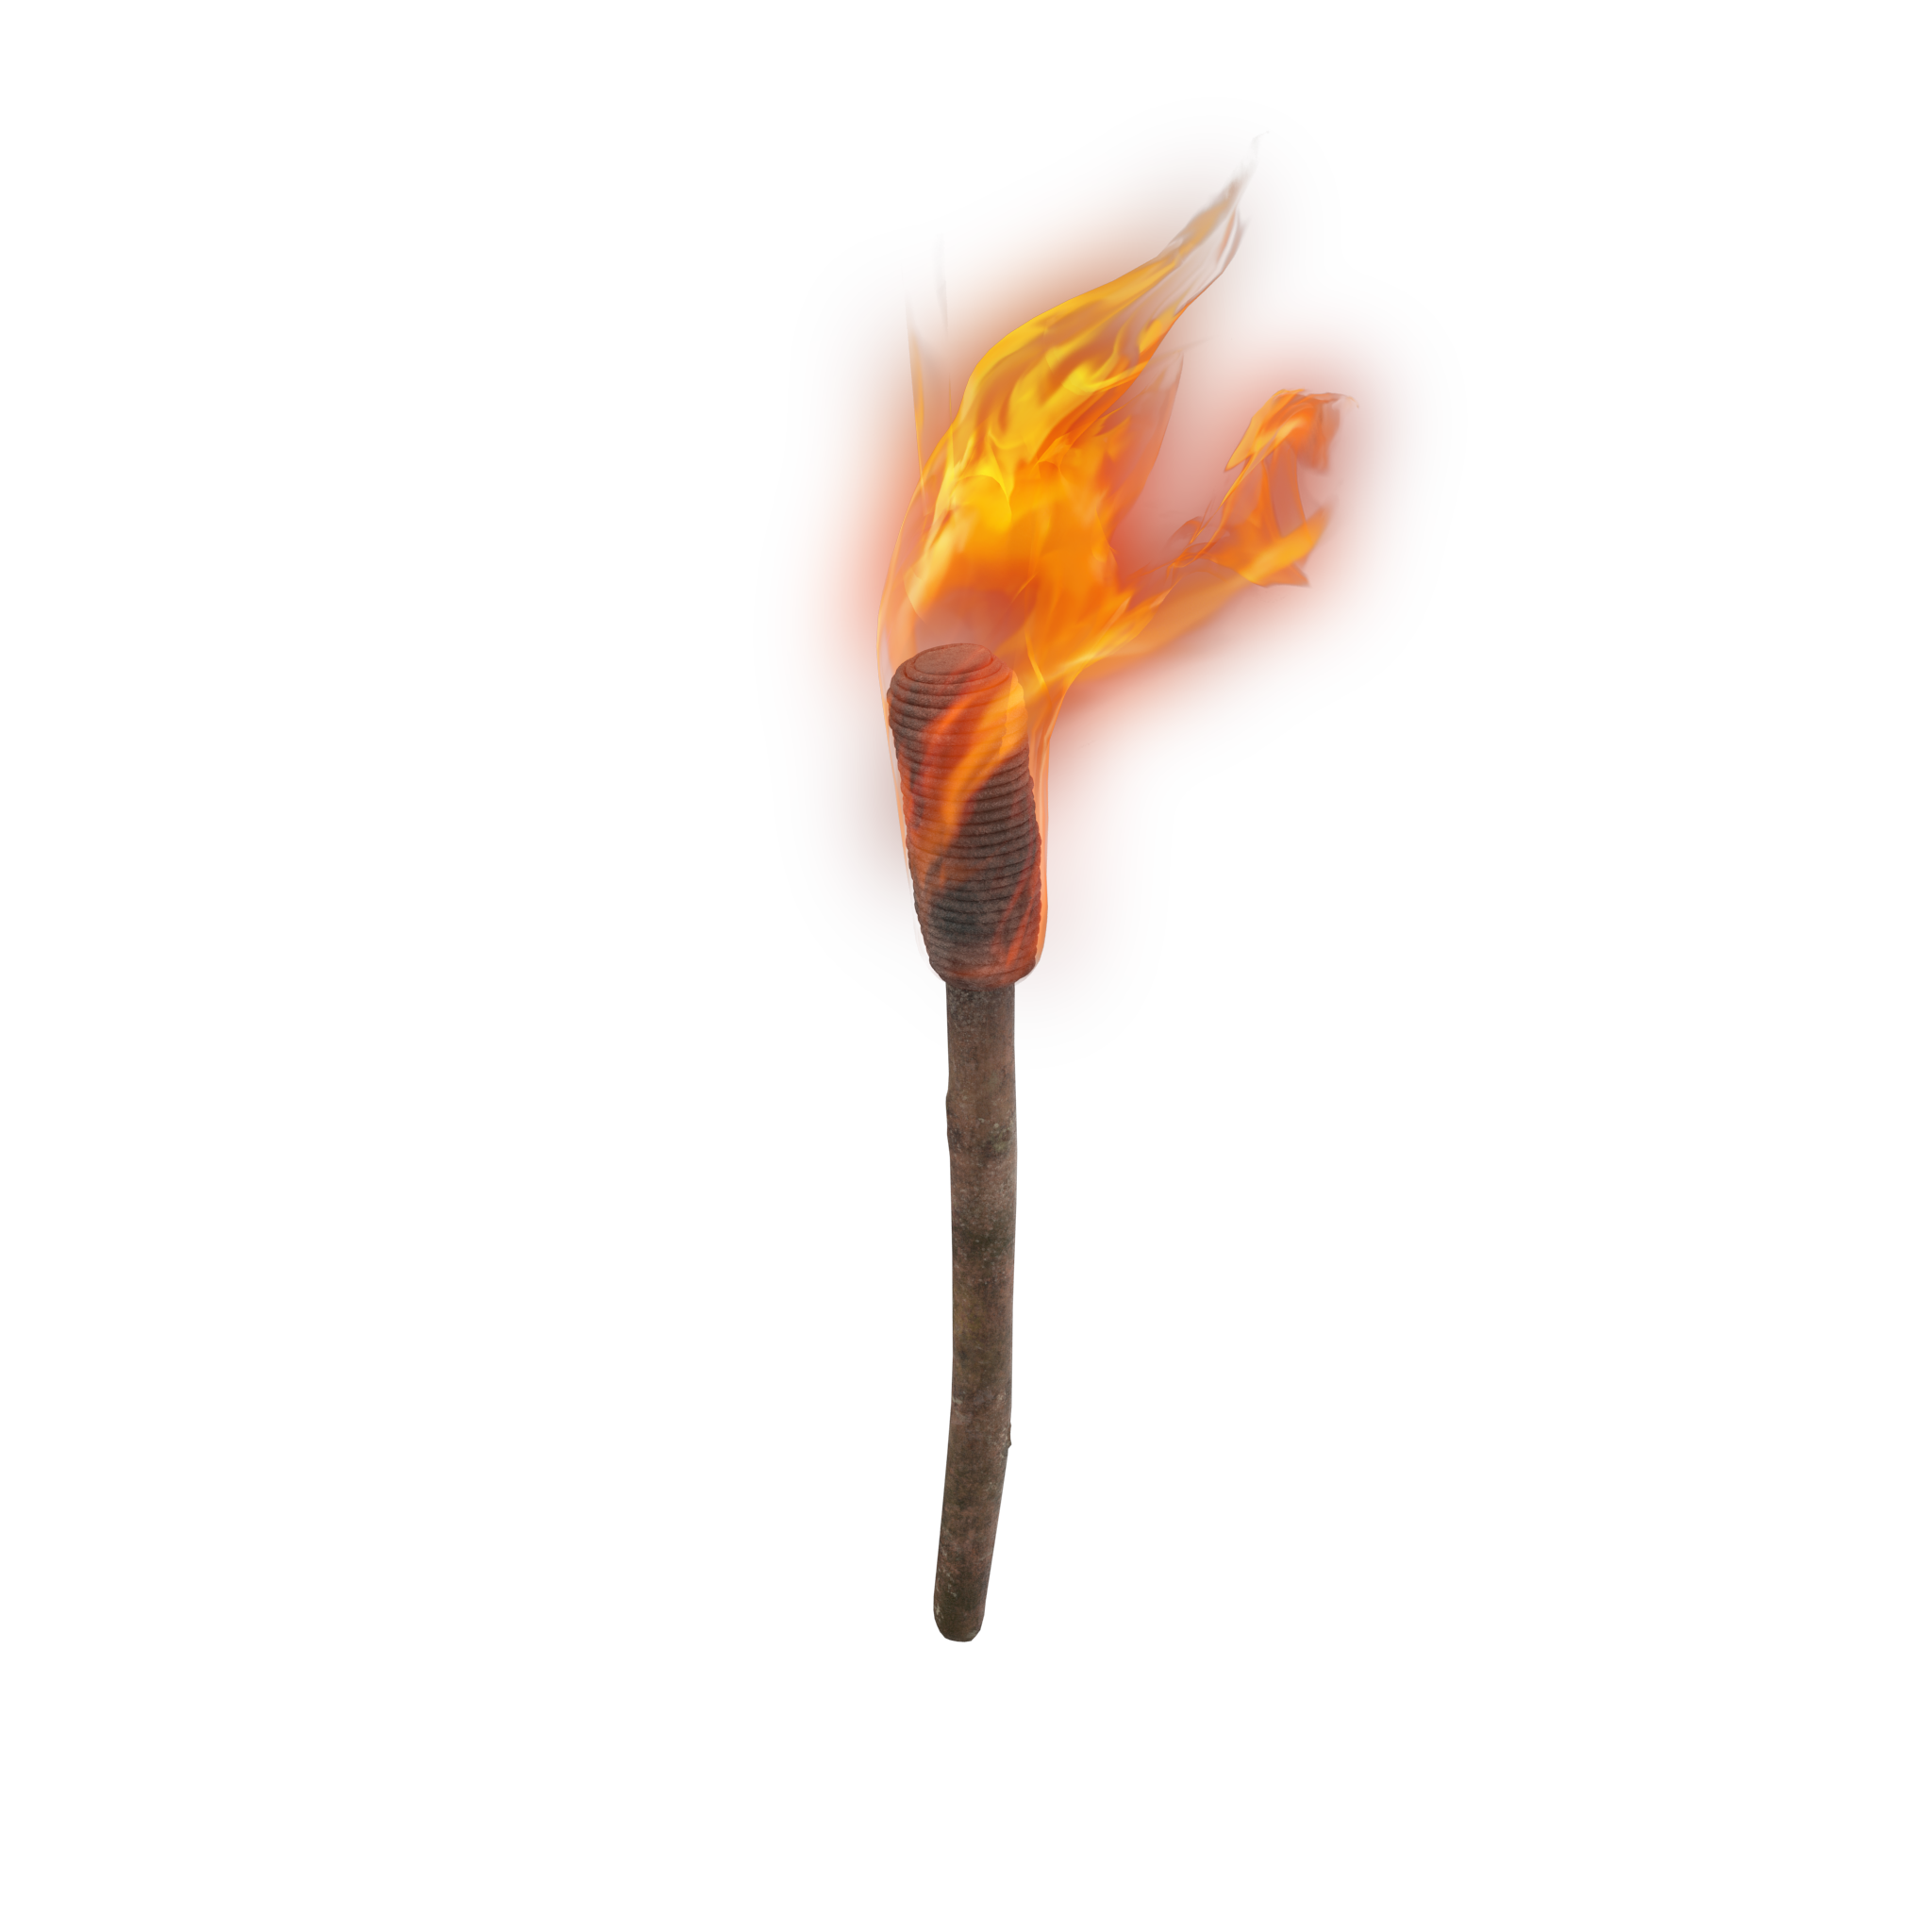 flame clipart torch flame